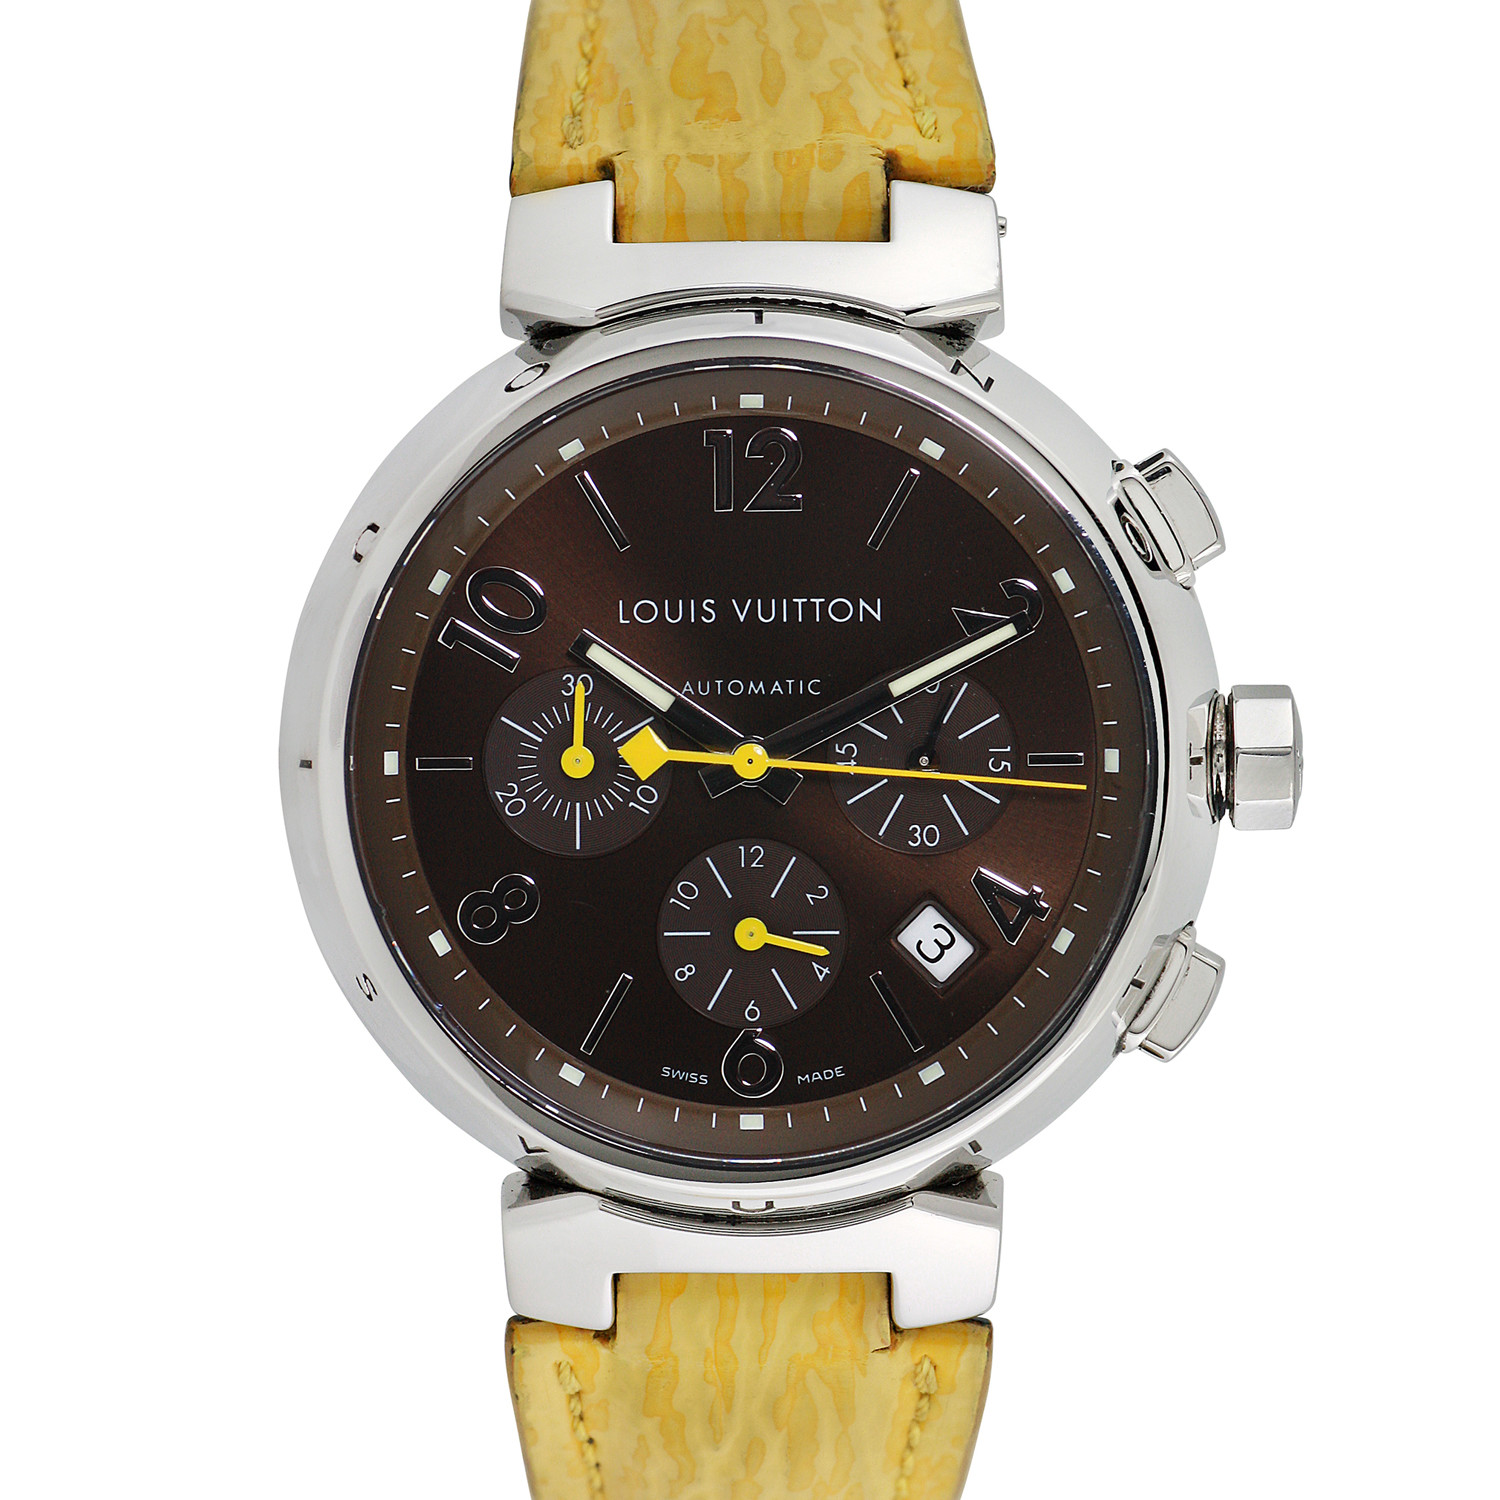 Louis Vuitton Tambour Chronograph Automatic // Q1121 // c.2000s // Pre-Owned - Pre-owned ...